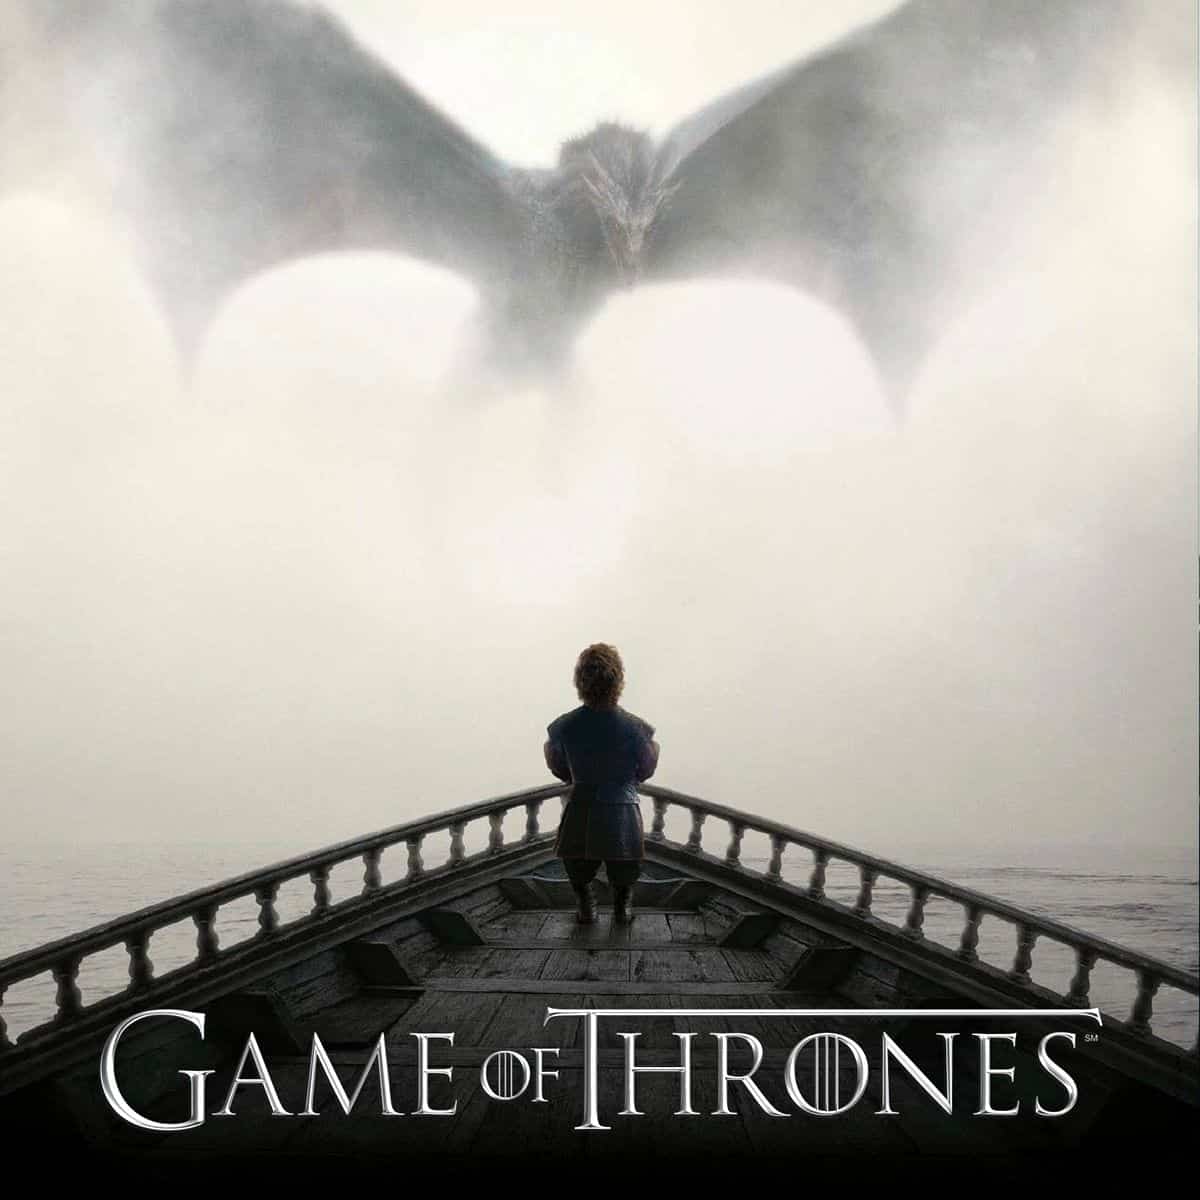 oster of the upcoming season of Game of Thrones featuring Tyrion face to face with a dragon. True to the tenets of great visual design, the poster has a very distinguishable focal point that highlights one of the main storylines of the show.